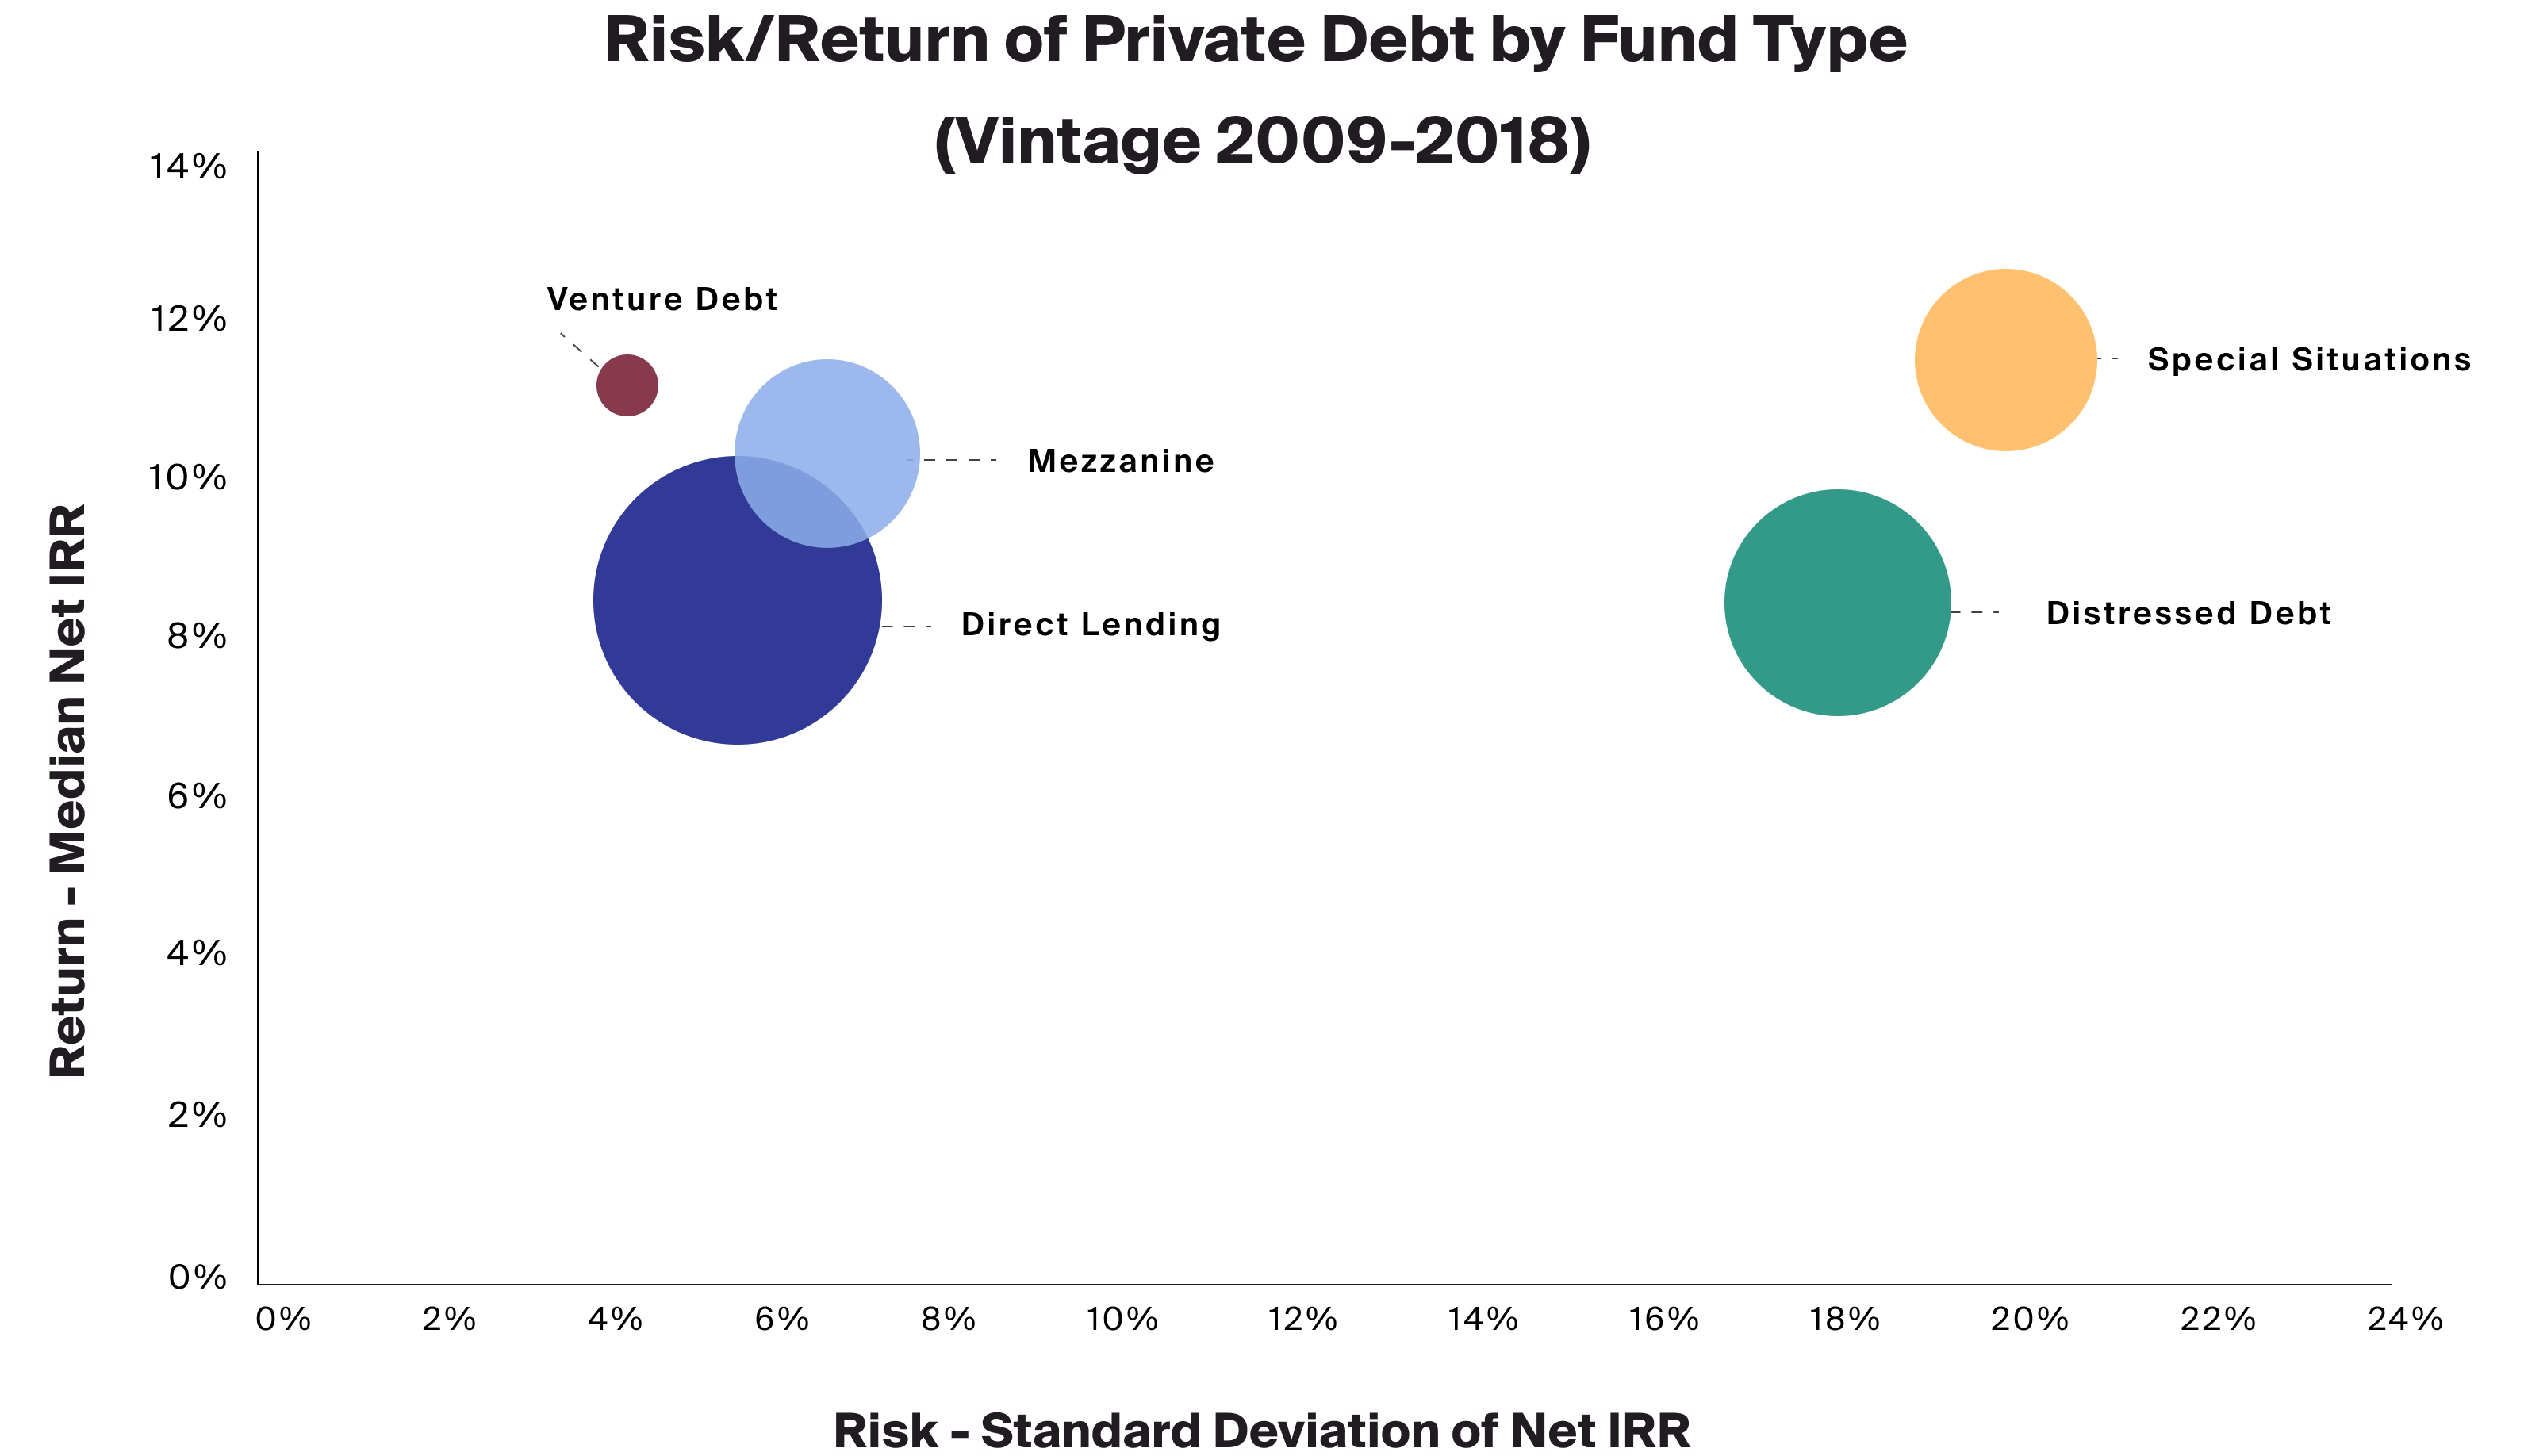 Exhibit 3: The risk and return profiles of private debt strategies can vary